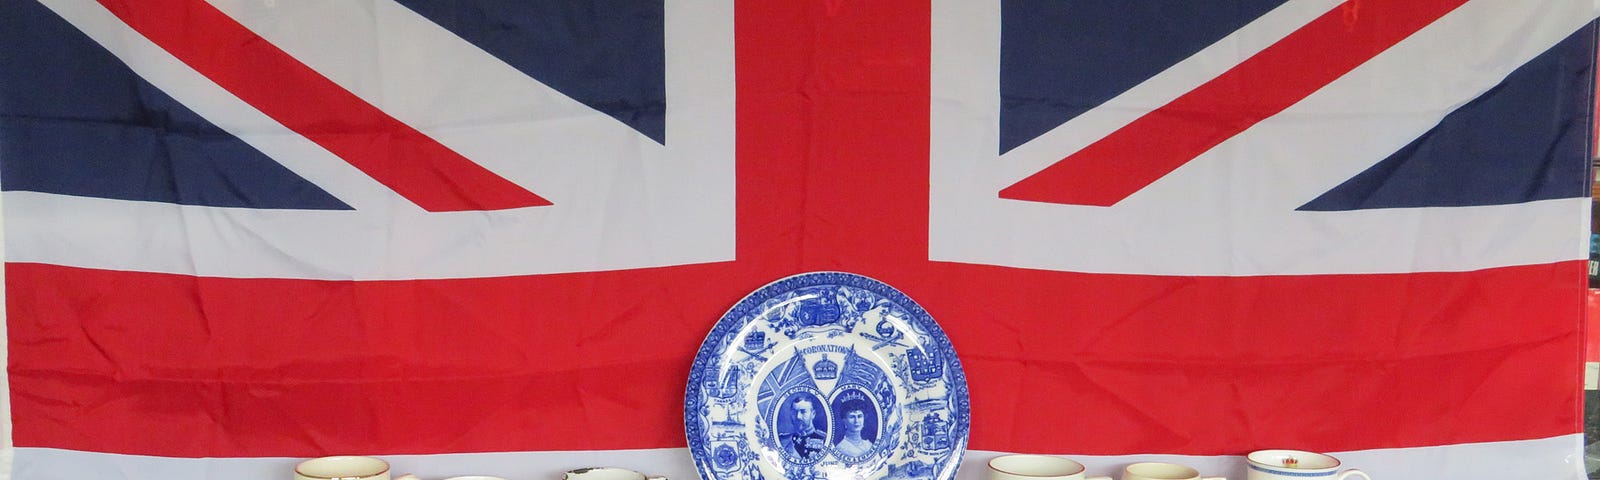 Image showing Collection of 6 Coronation & Jubilee Mugs & Plate set against the UK National Union flag